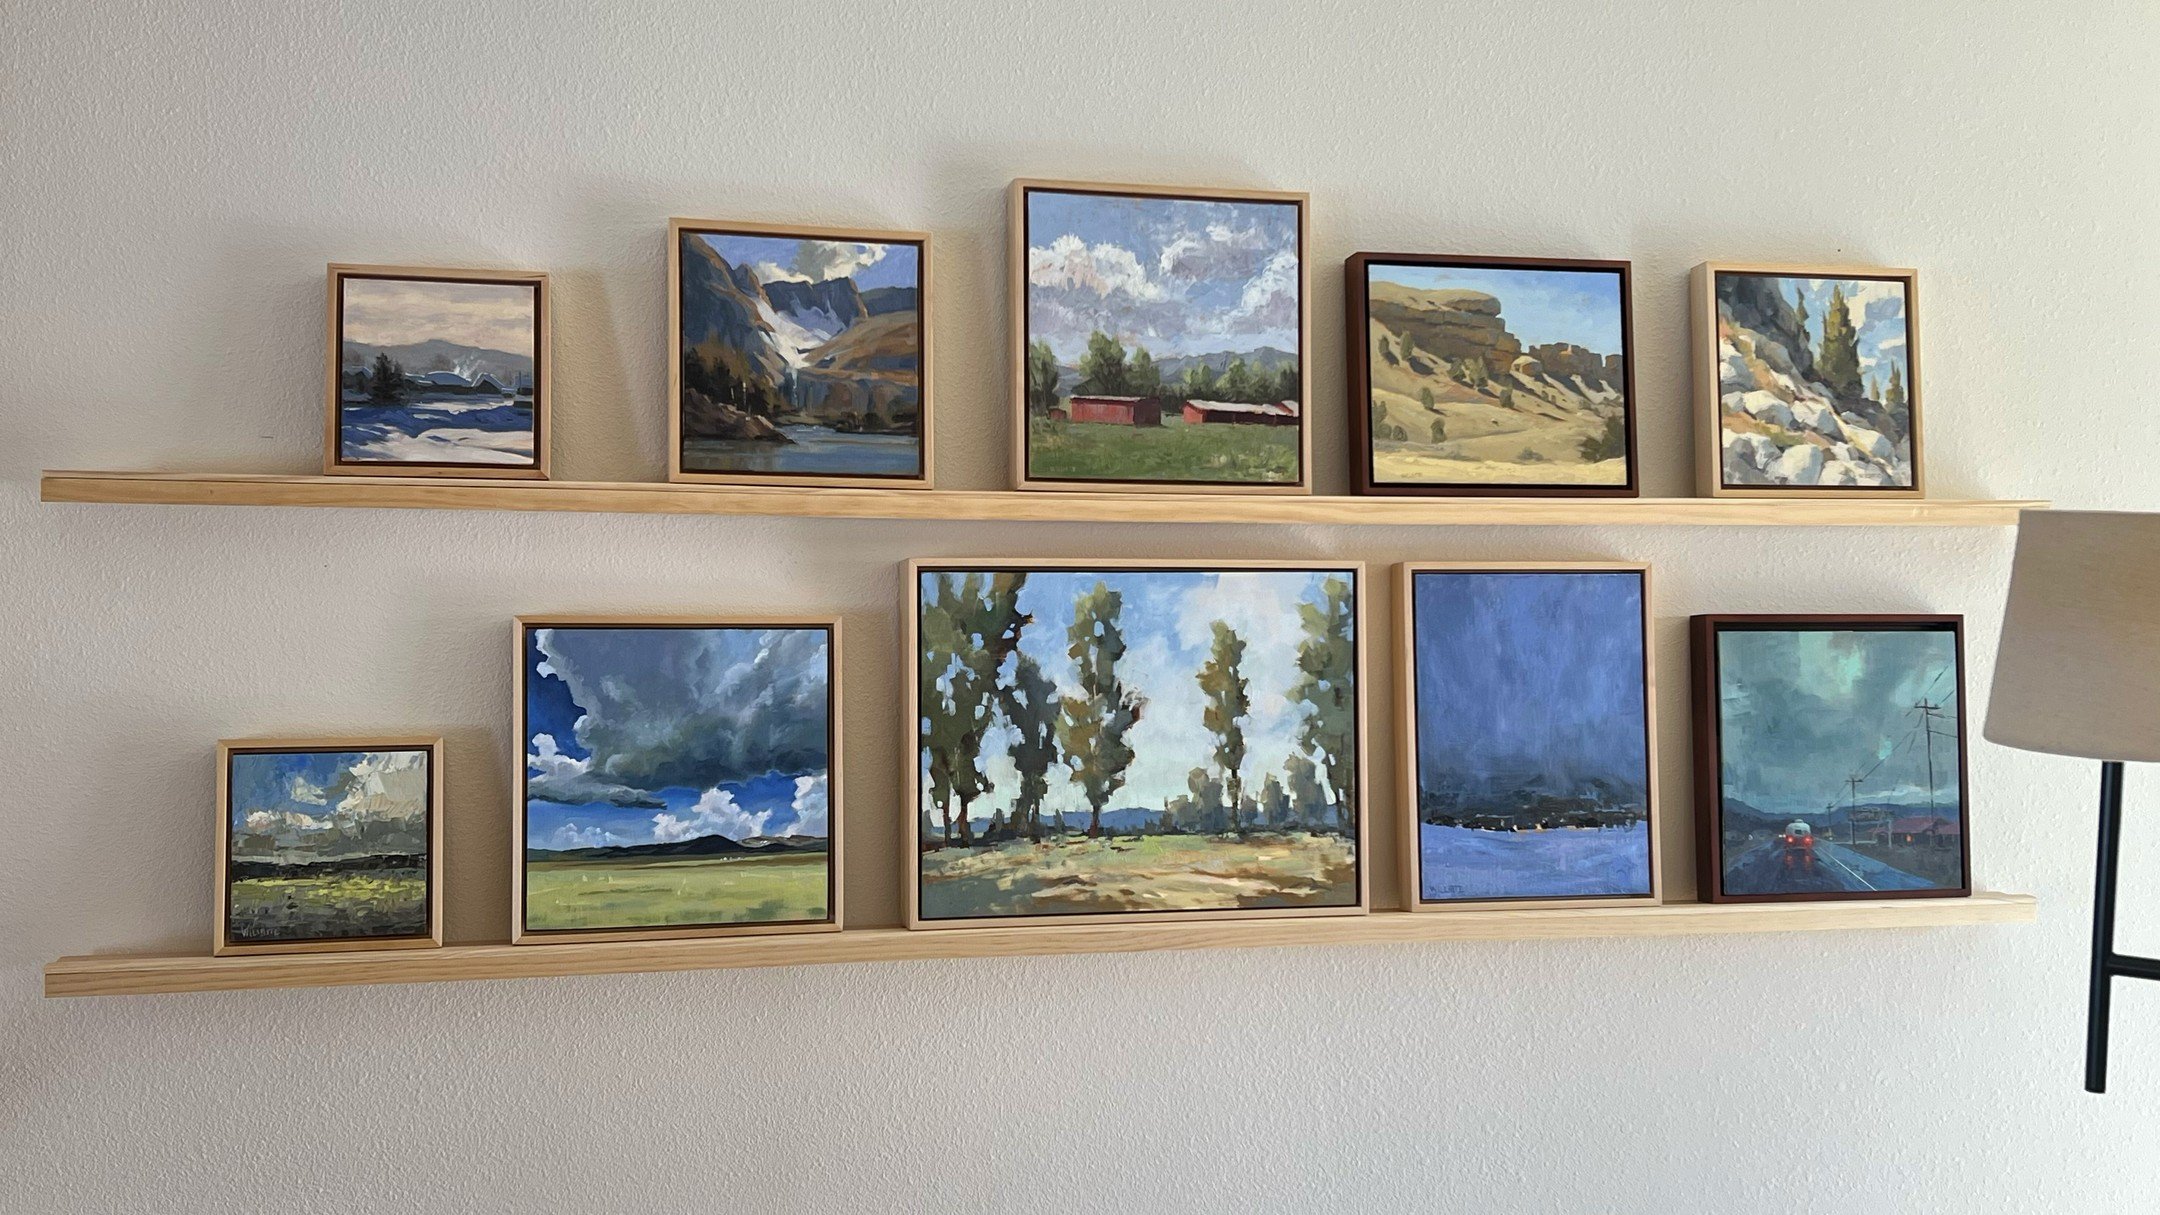 I needed a place to put paintings while they are drying and waiting to be sold. A couple of 1x3s and floating shelf hangers worked perfectly! 

 #hangingart #howtohangart #hangingartwork #oilpainting #landscapepainting #coloradoart #frameart #artfram